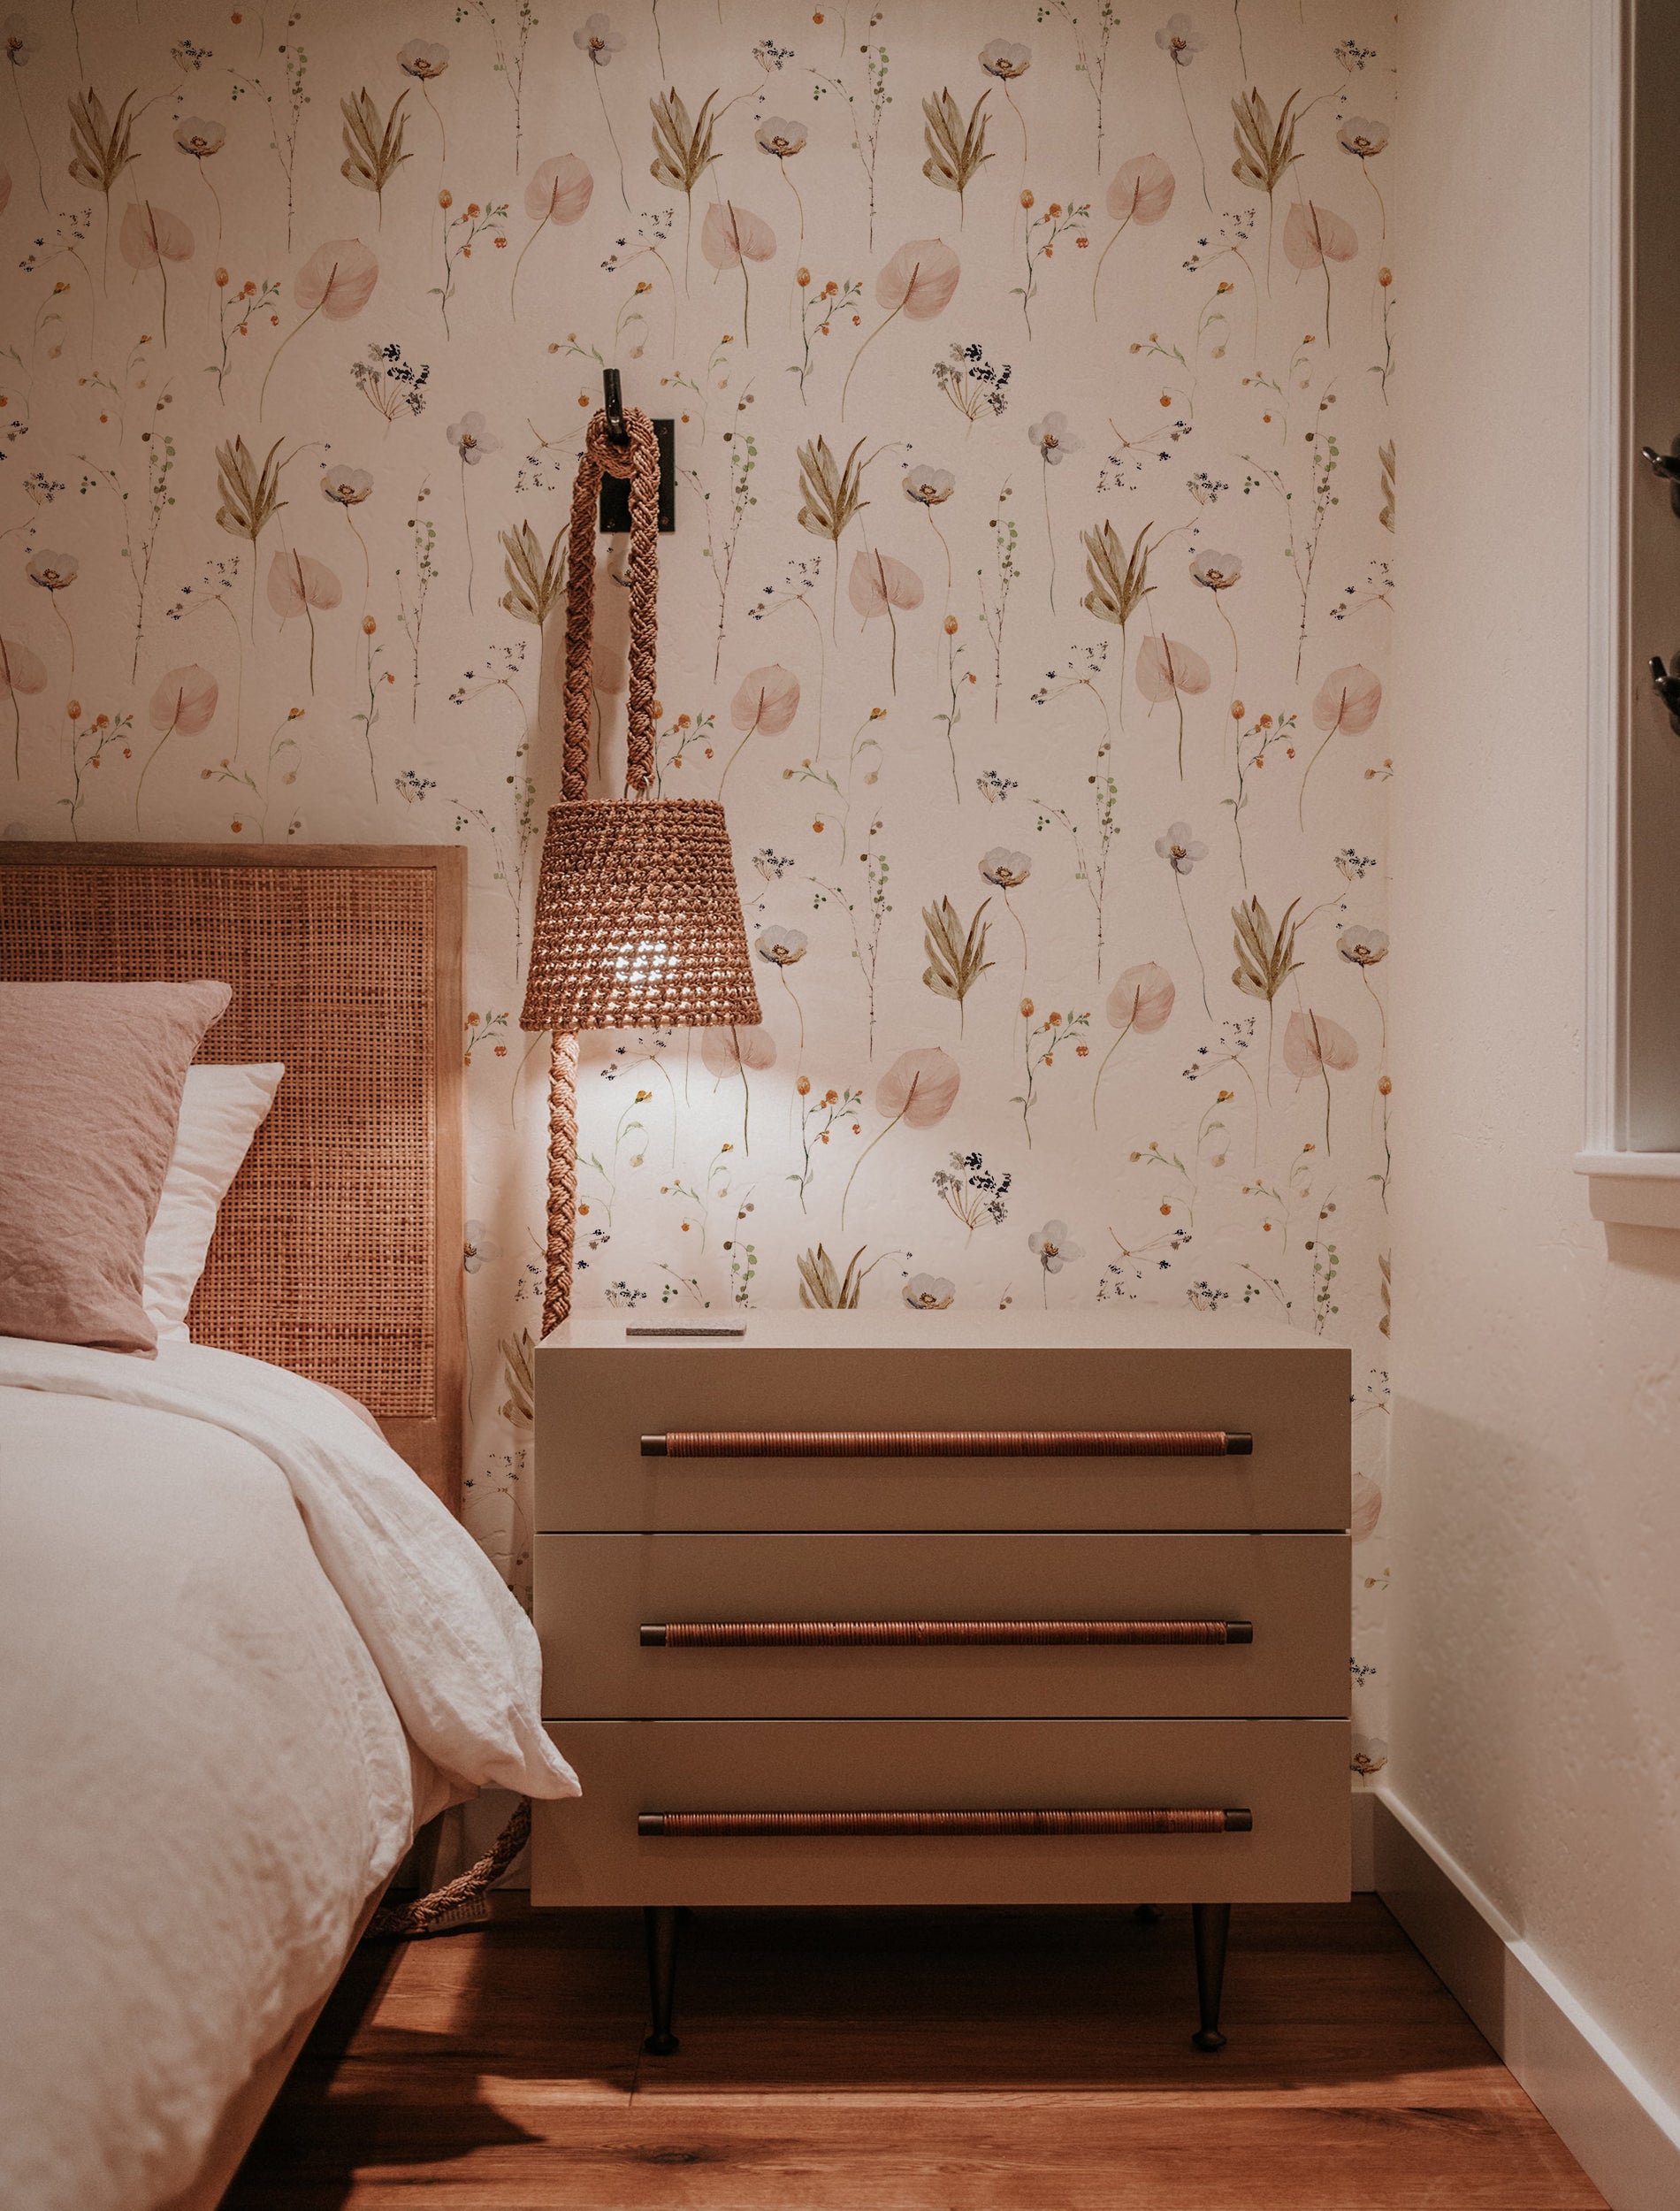 A warmly lit bedroom corner with Ikebana Floral Wallpaper adding a touch of nature-inspired elegance through its delicate floral design, paired with a wicker headboard and a modern nightstand with copper handles.